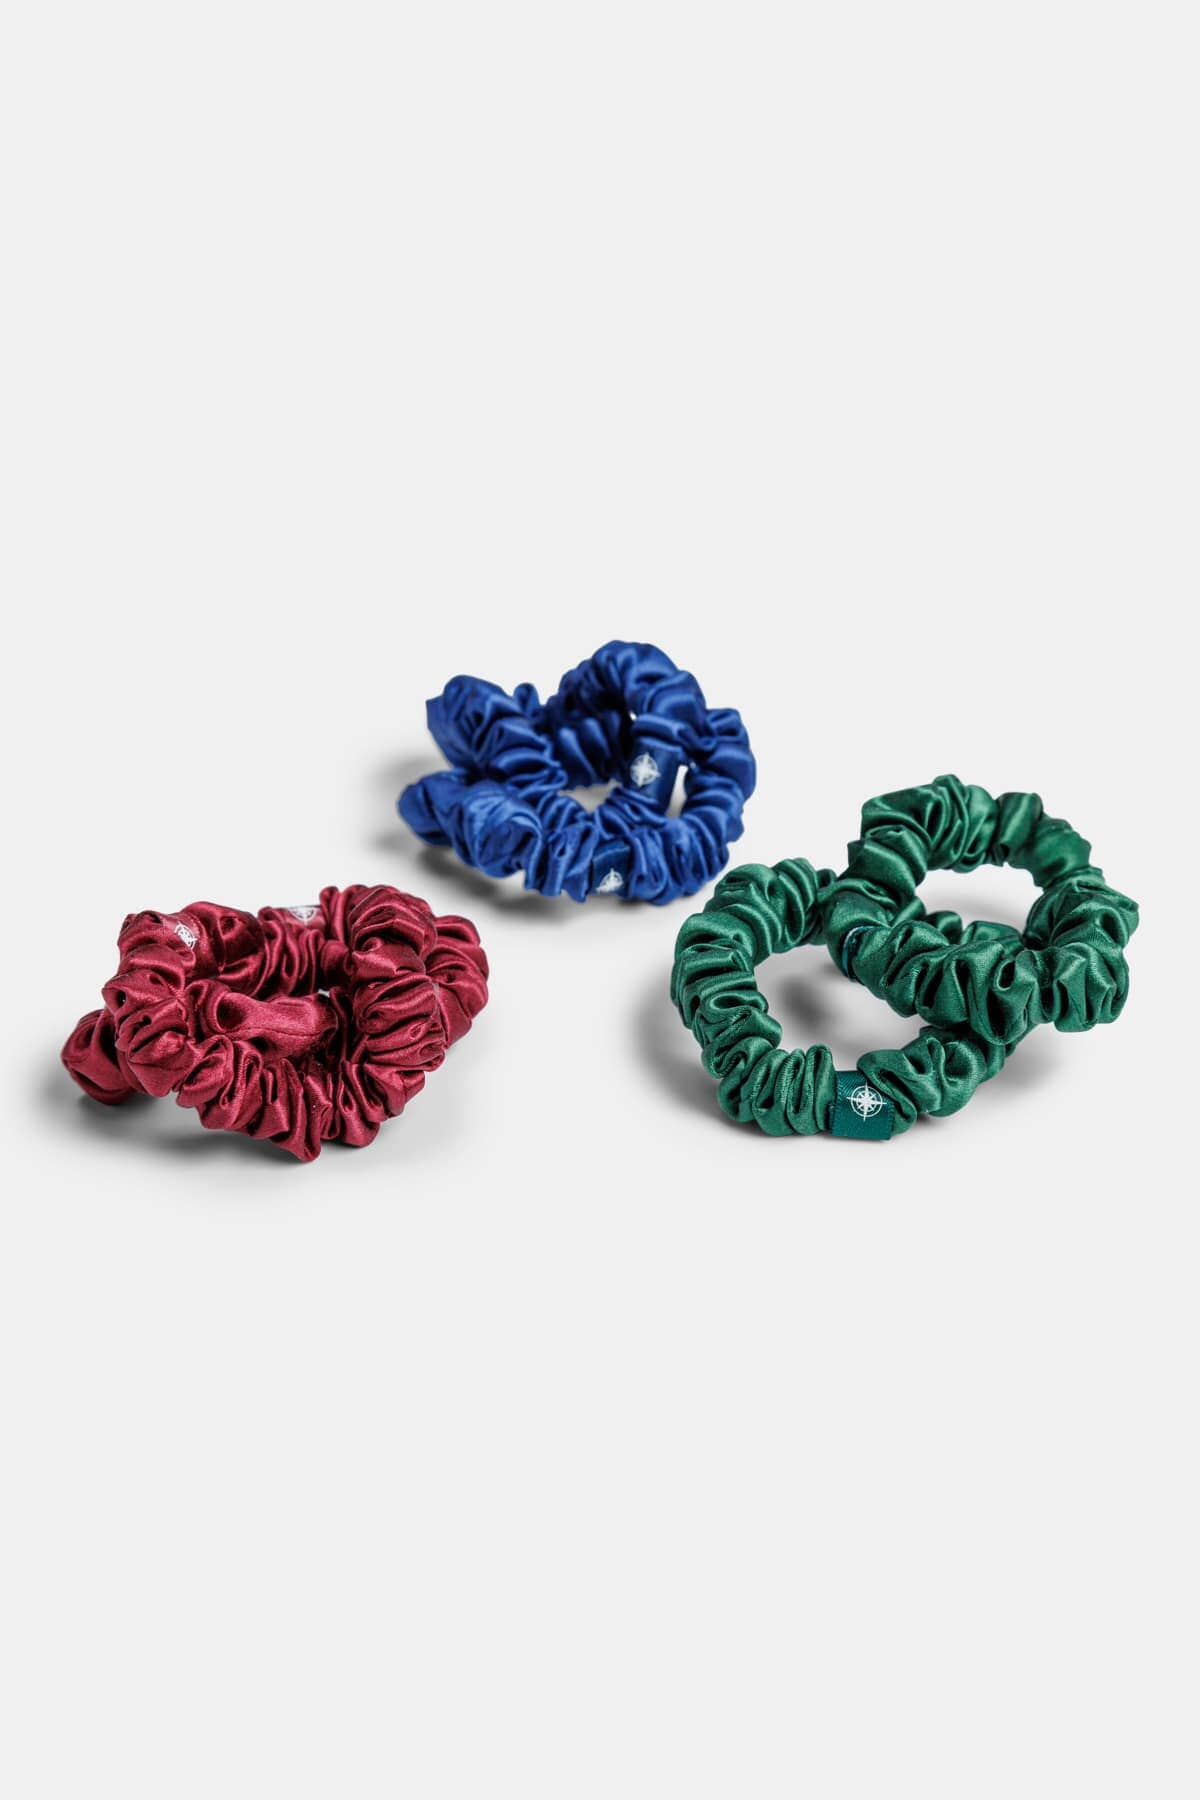 100% Pure Mulberry Silk Hair Scrunchies with Gift Box - Set of 6 Skinny Hair Ties Womens&gt;Beauty&gt;Hair Care Fishers Finery 